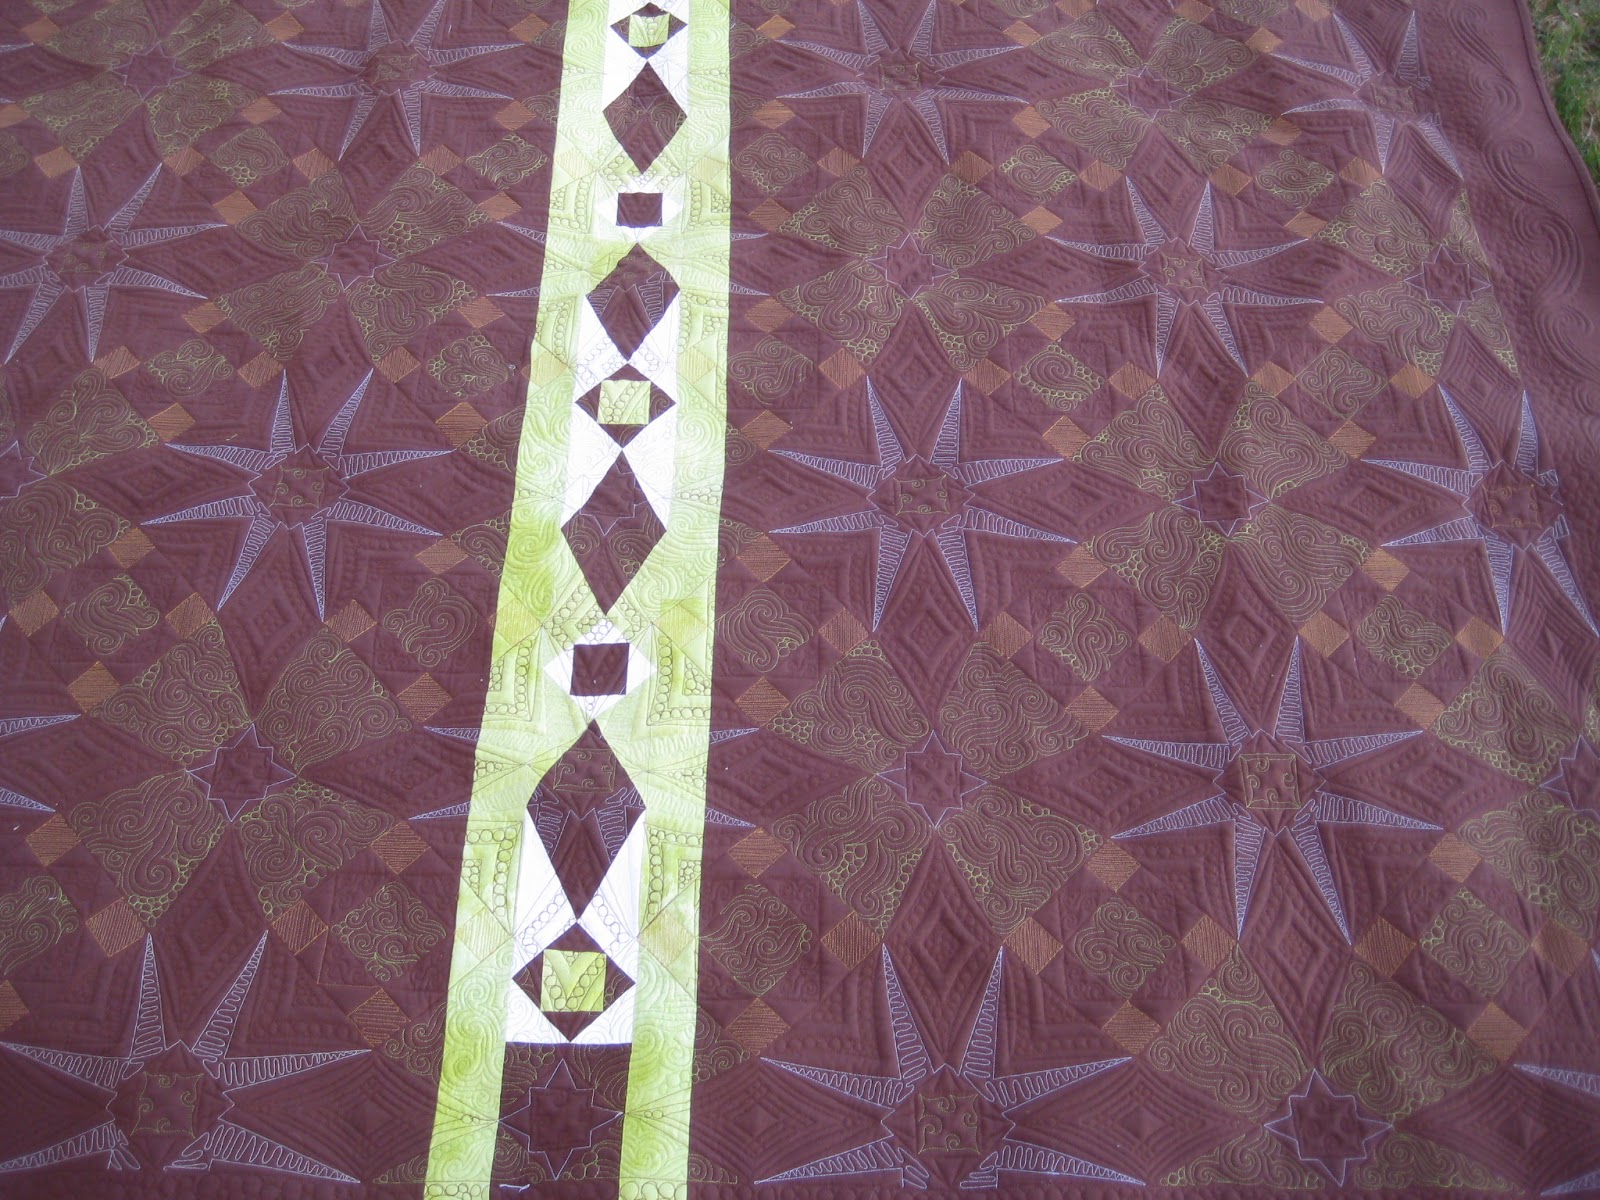 Threads on the floor: All finished but the binding